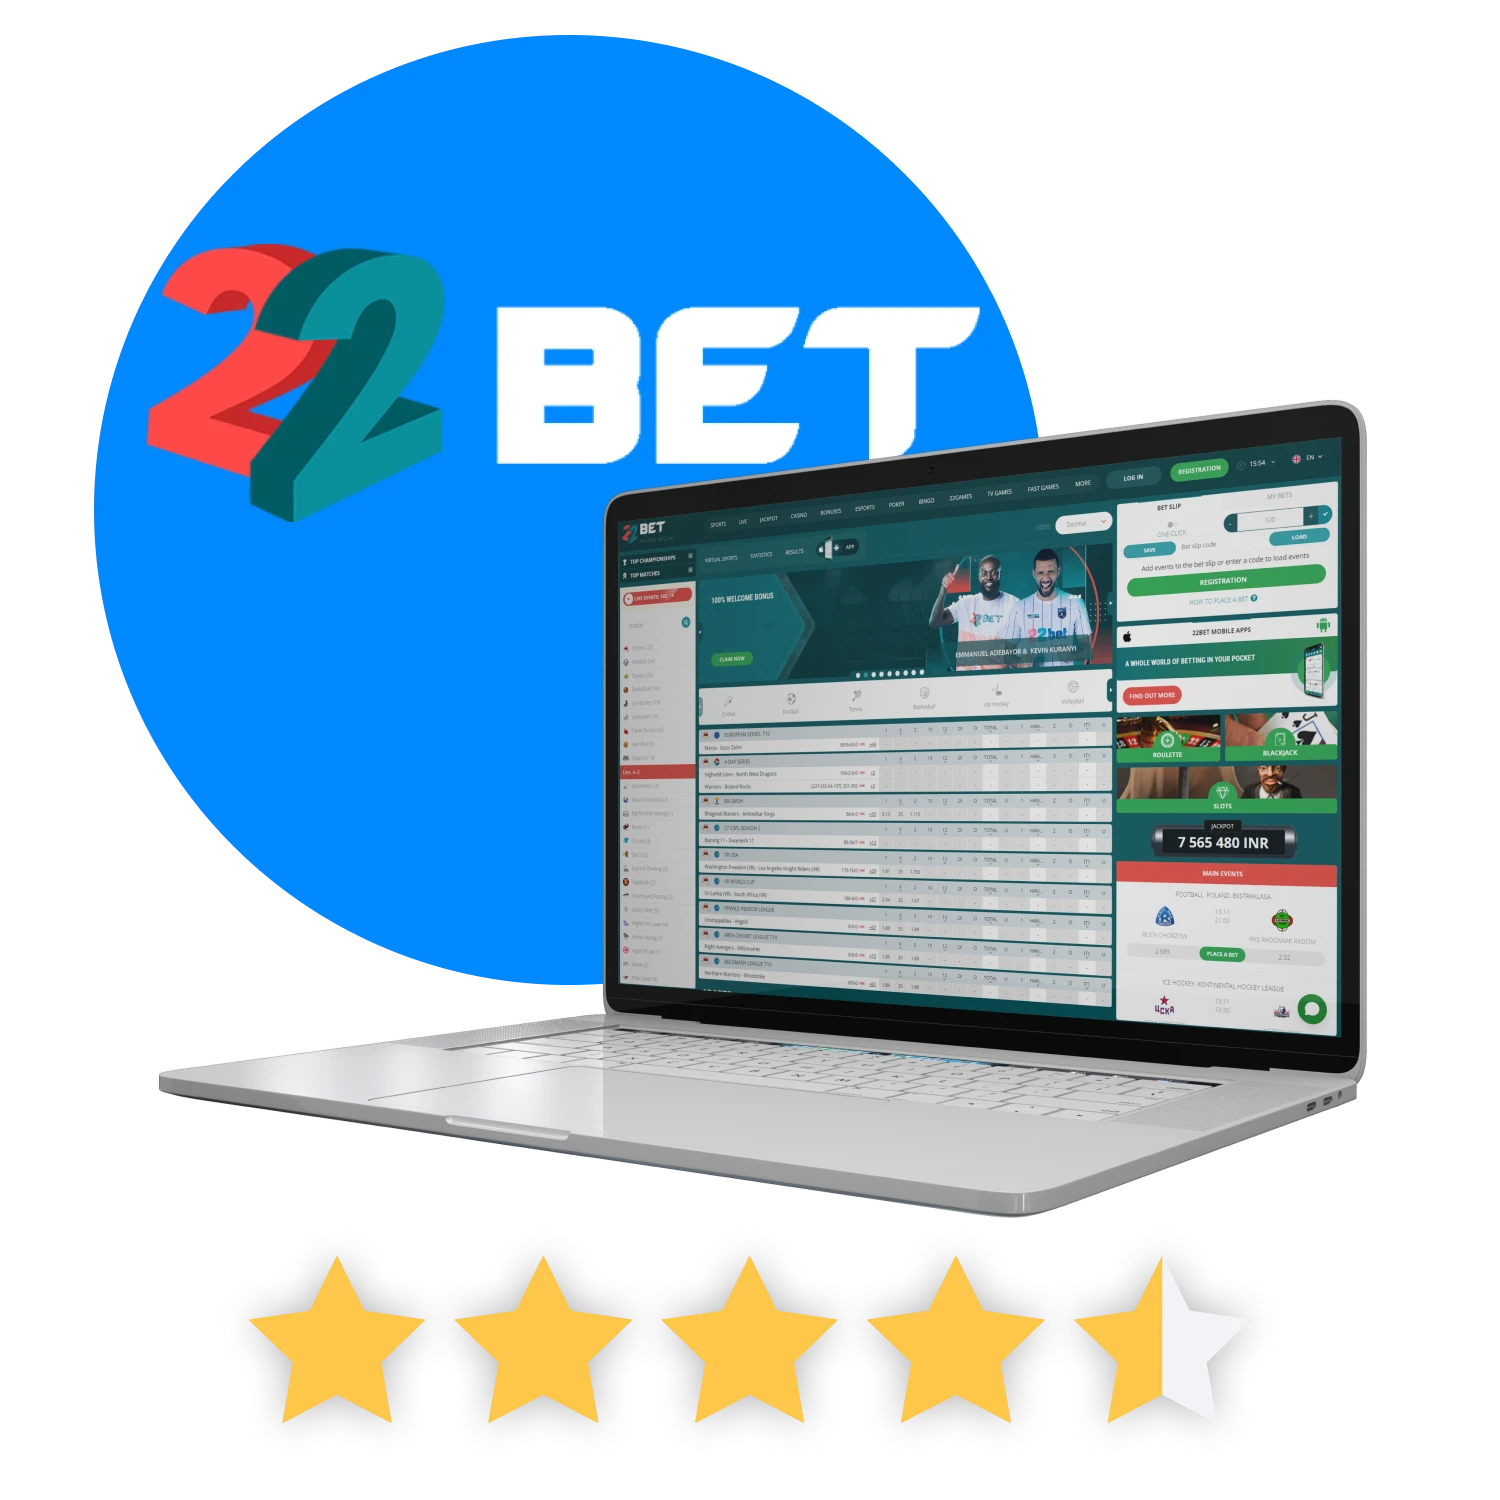 Find out user reviews about the brand 22bet.